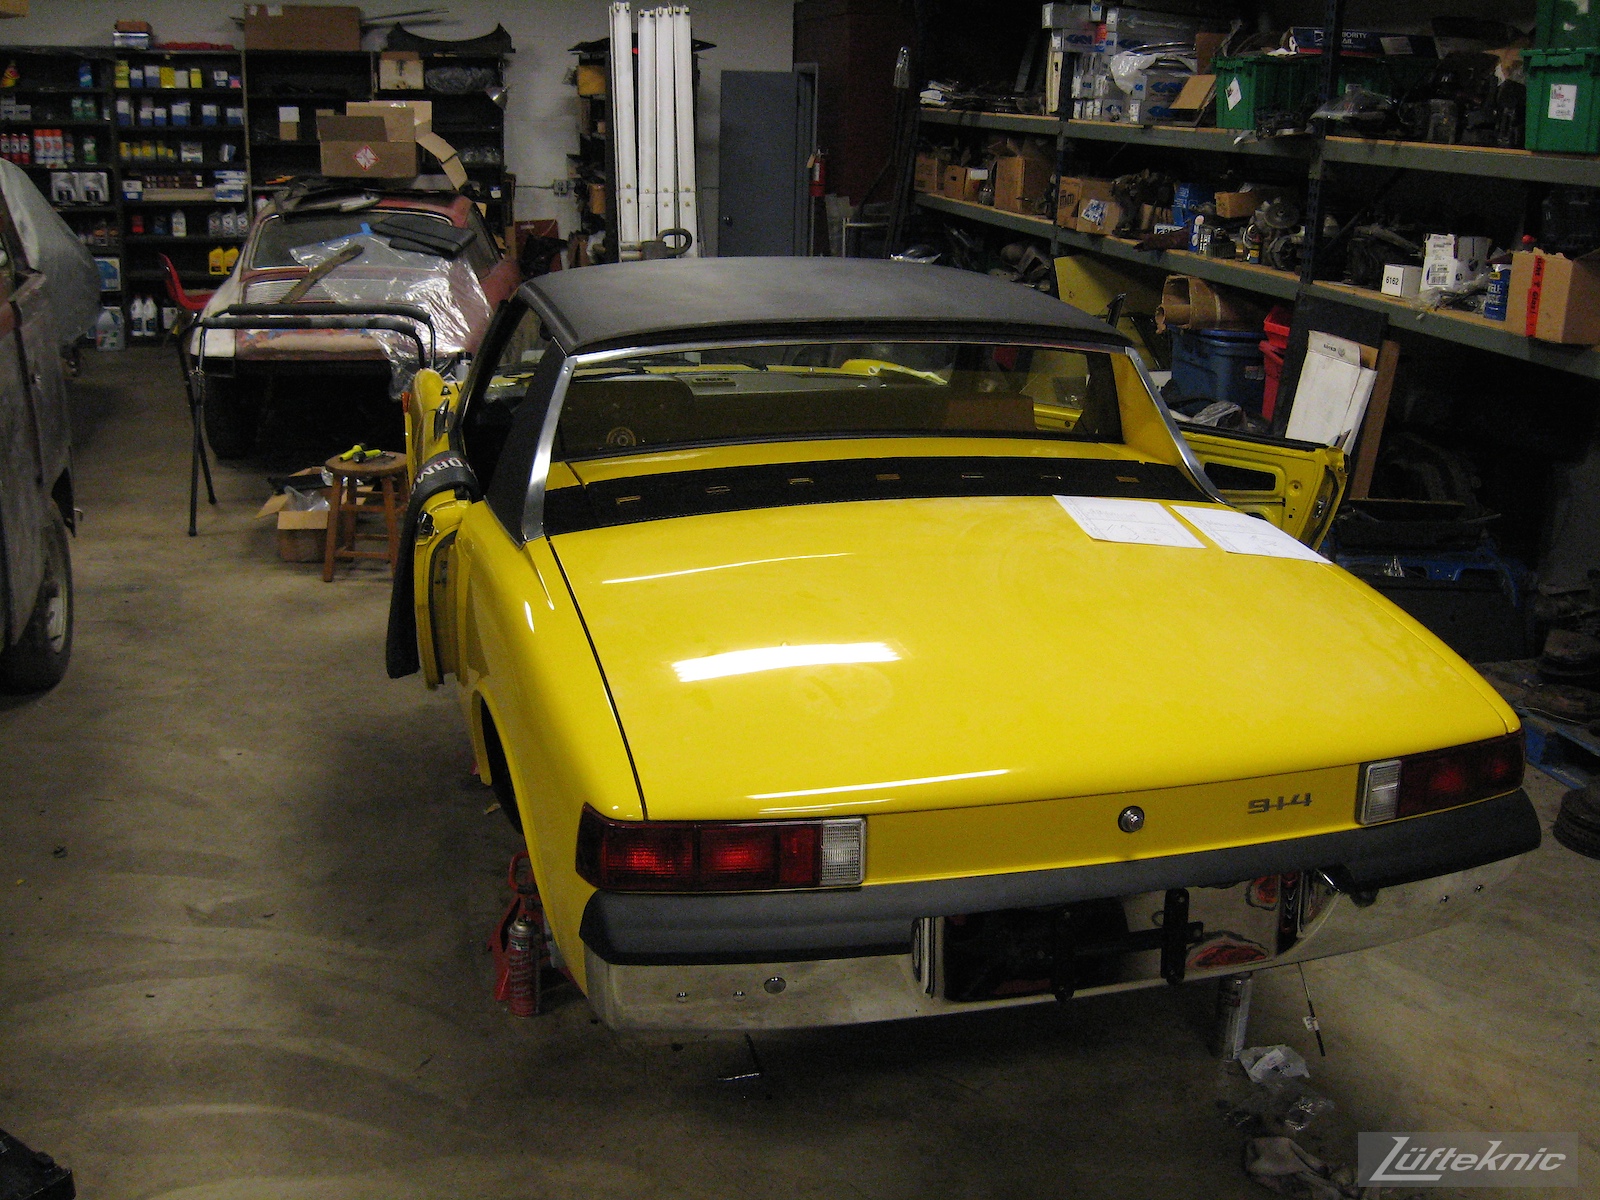 New top and nearly complete restored yellow Porsche 914 at Lufteknic.